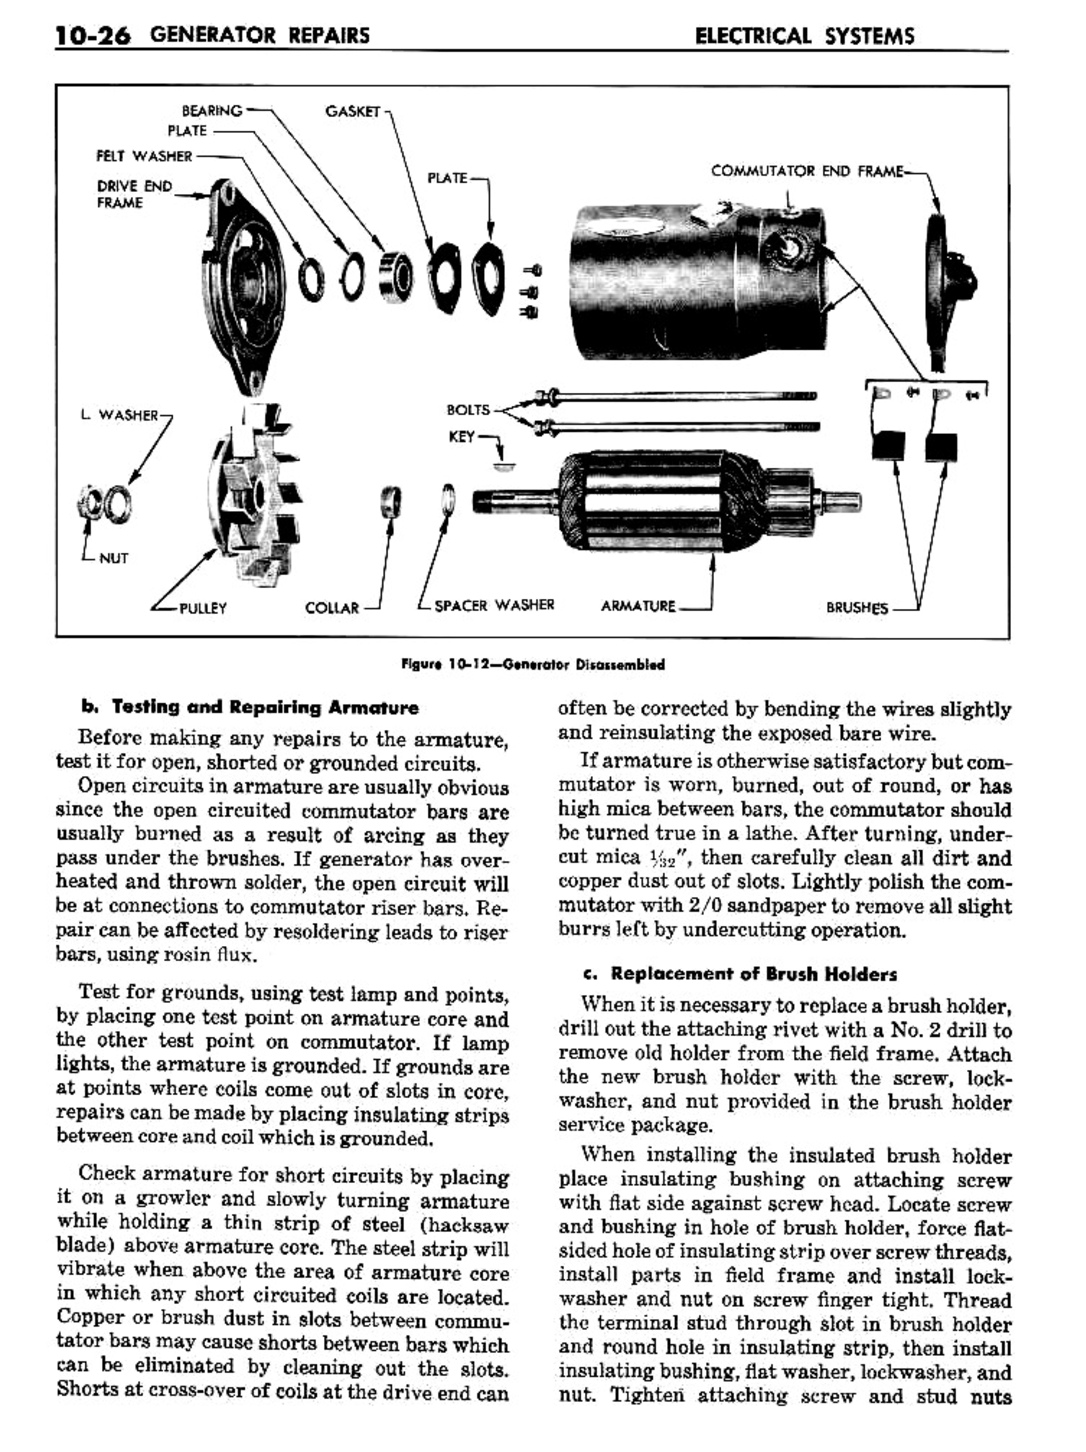 n_11 1957 Buick Shop Manual - Electrical Systems-026-026.jpg